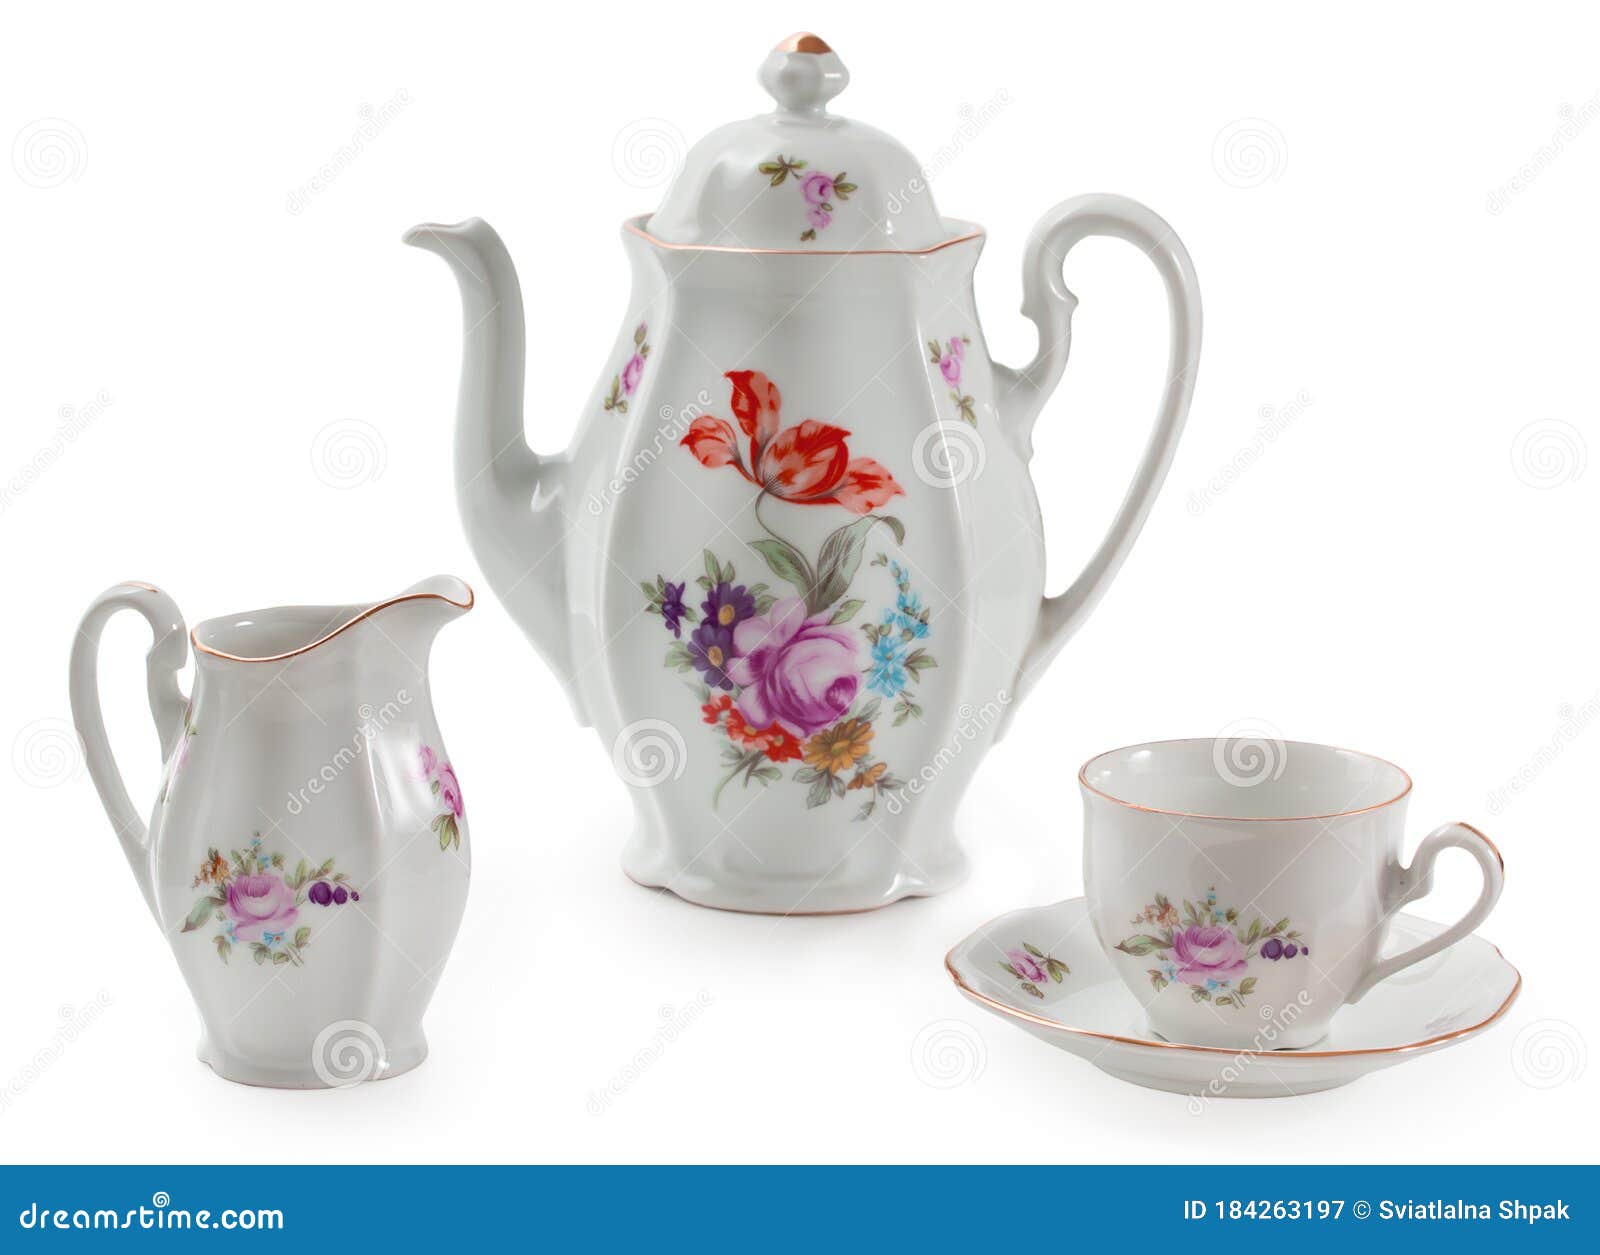 https://thumbs.dreamstime.com/z/vintage-czech-porcelain-set-coffee-old-style-rich-decorated-flower-decors-there-pot-mug-saucer-creamer-isolated-184263197.jpg